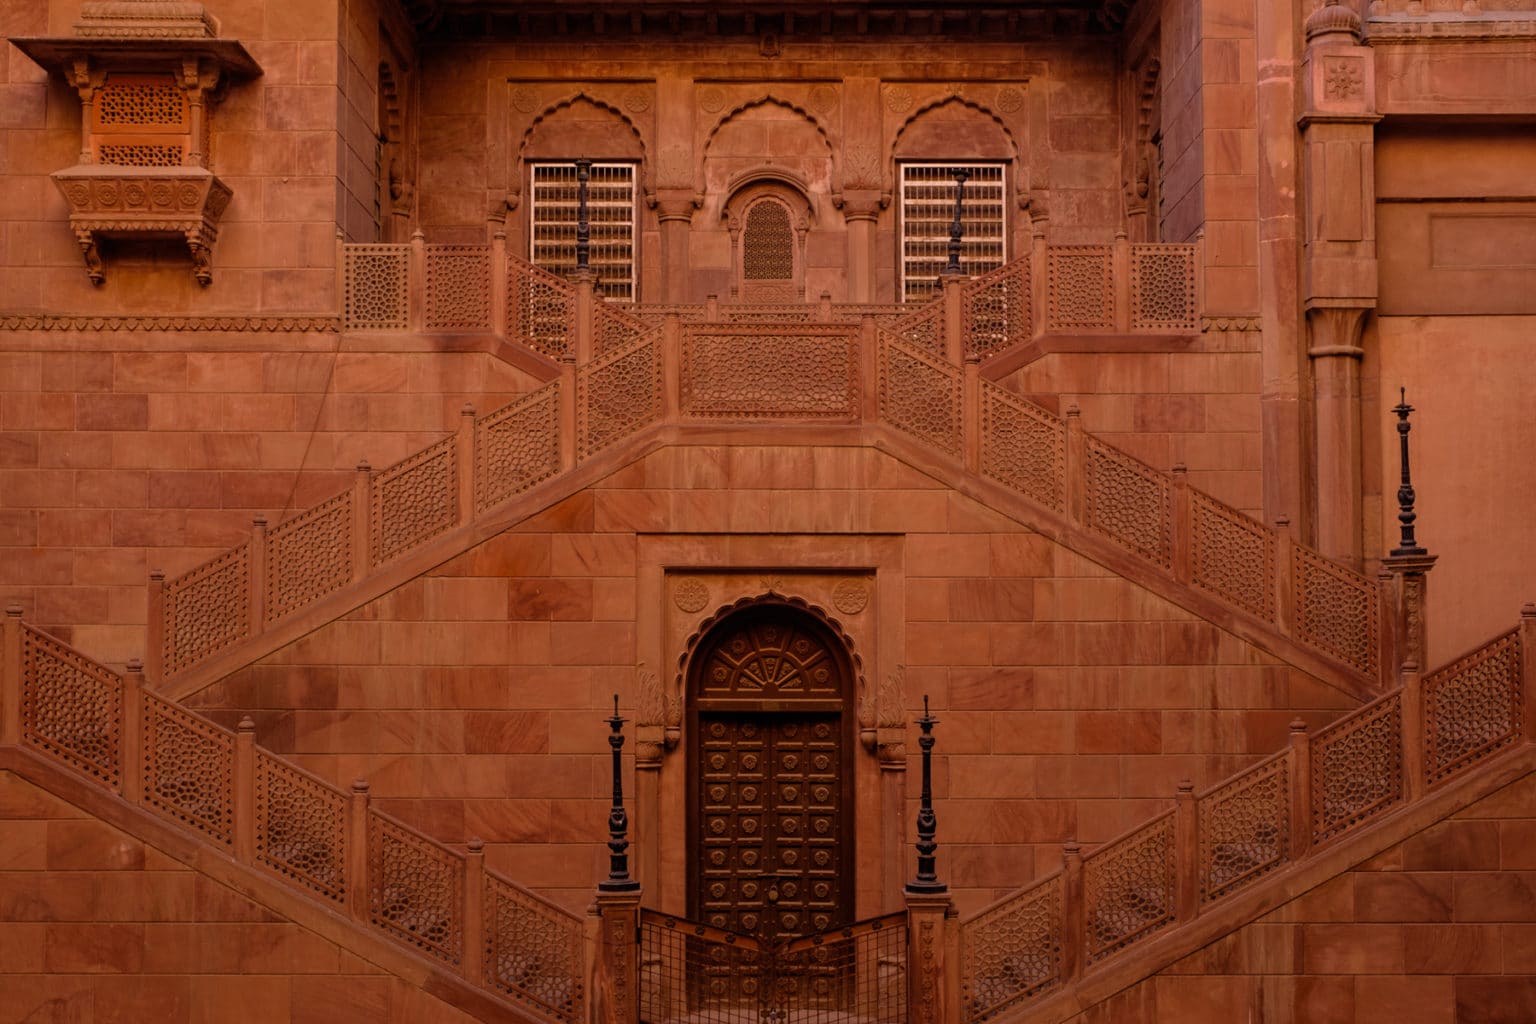 Bikaner's Junaghad Fort looks best in the early mornings and late evenings when the red sandstone positively glows.